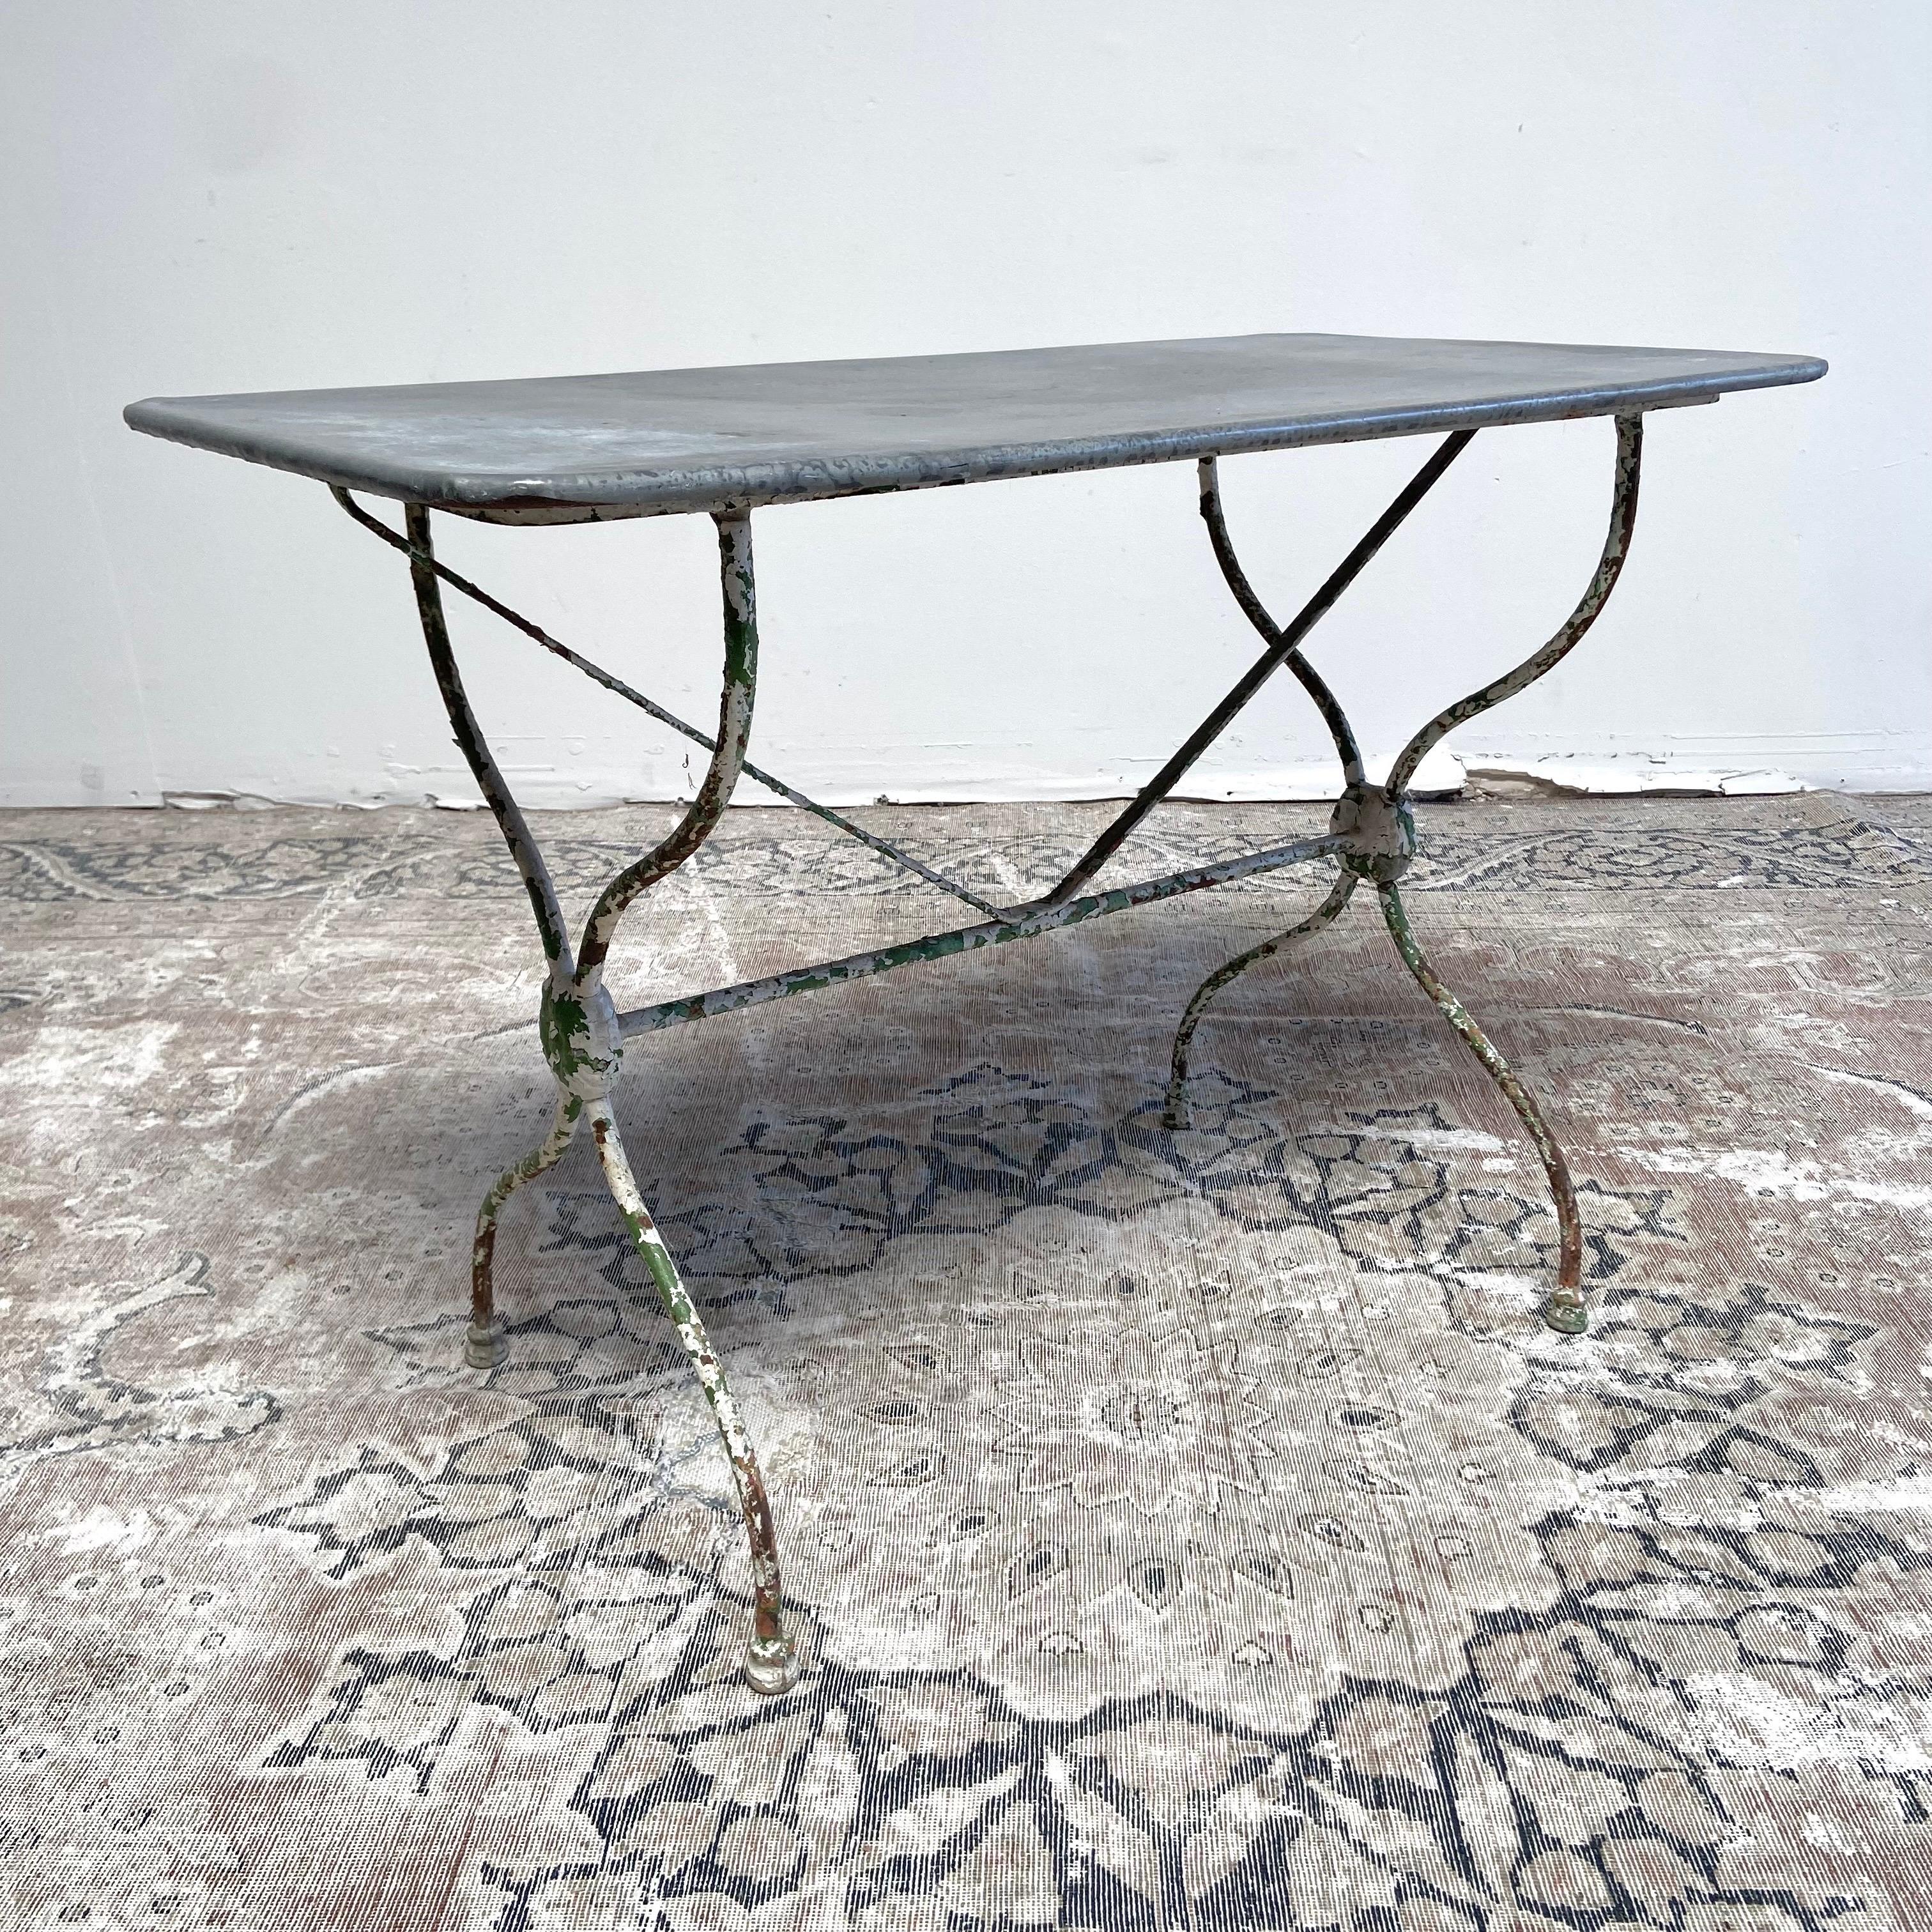 Antique potting tables in good condition are very difficult to source, particularly ones in zinc with lovely patinas. 
Fully functional, they also work as serving or display tables for inside or out. 
French zinc table 38-1/2” W x 20-1/2” D x 27”